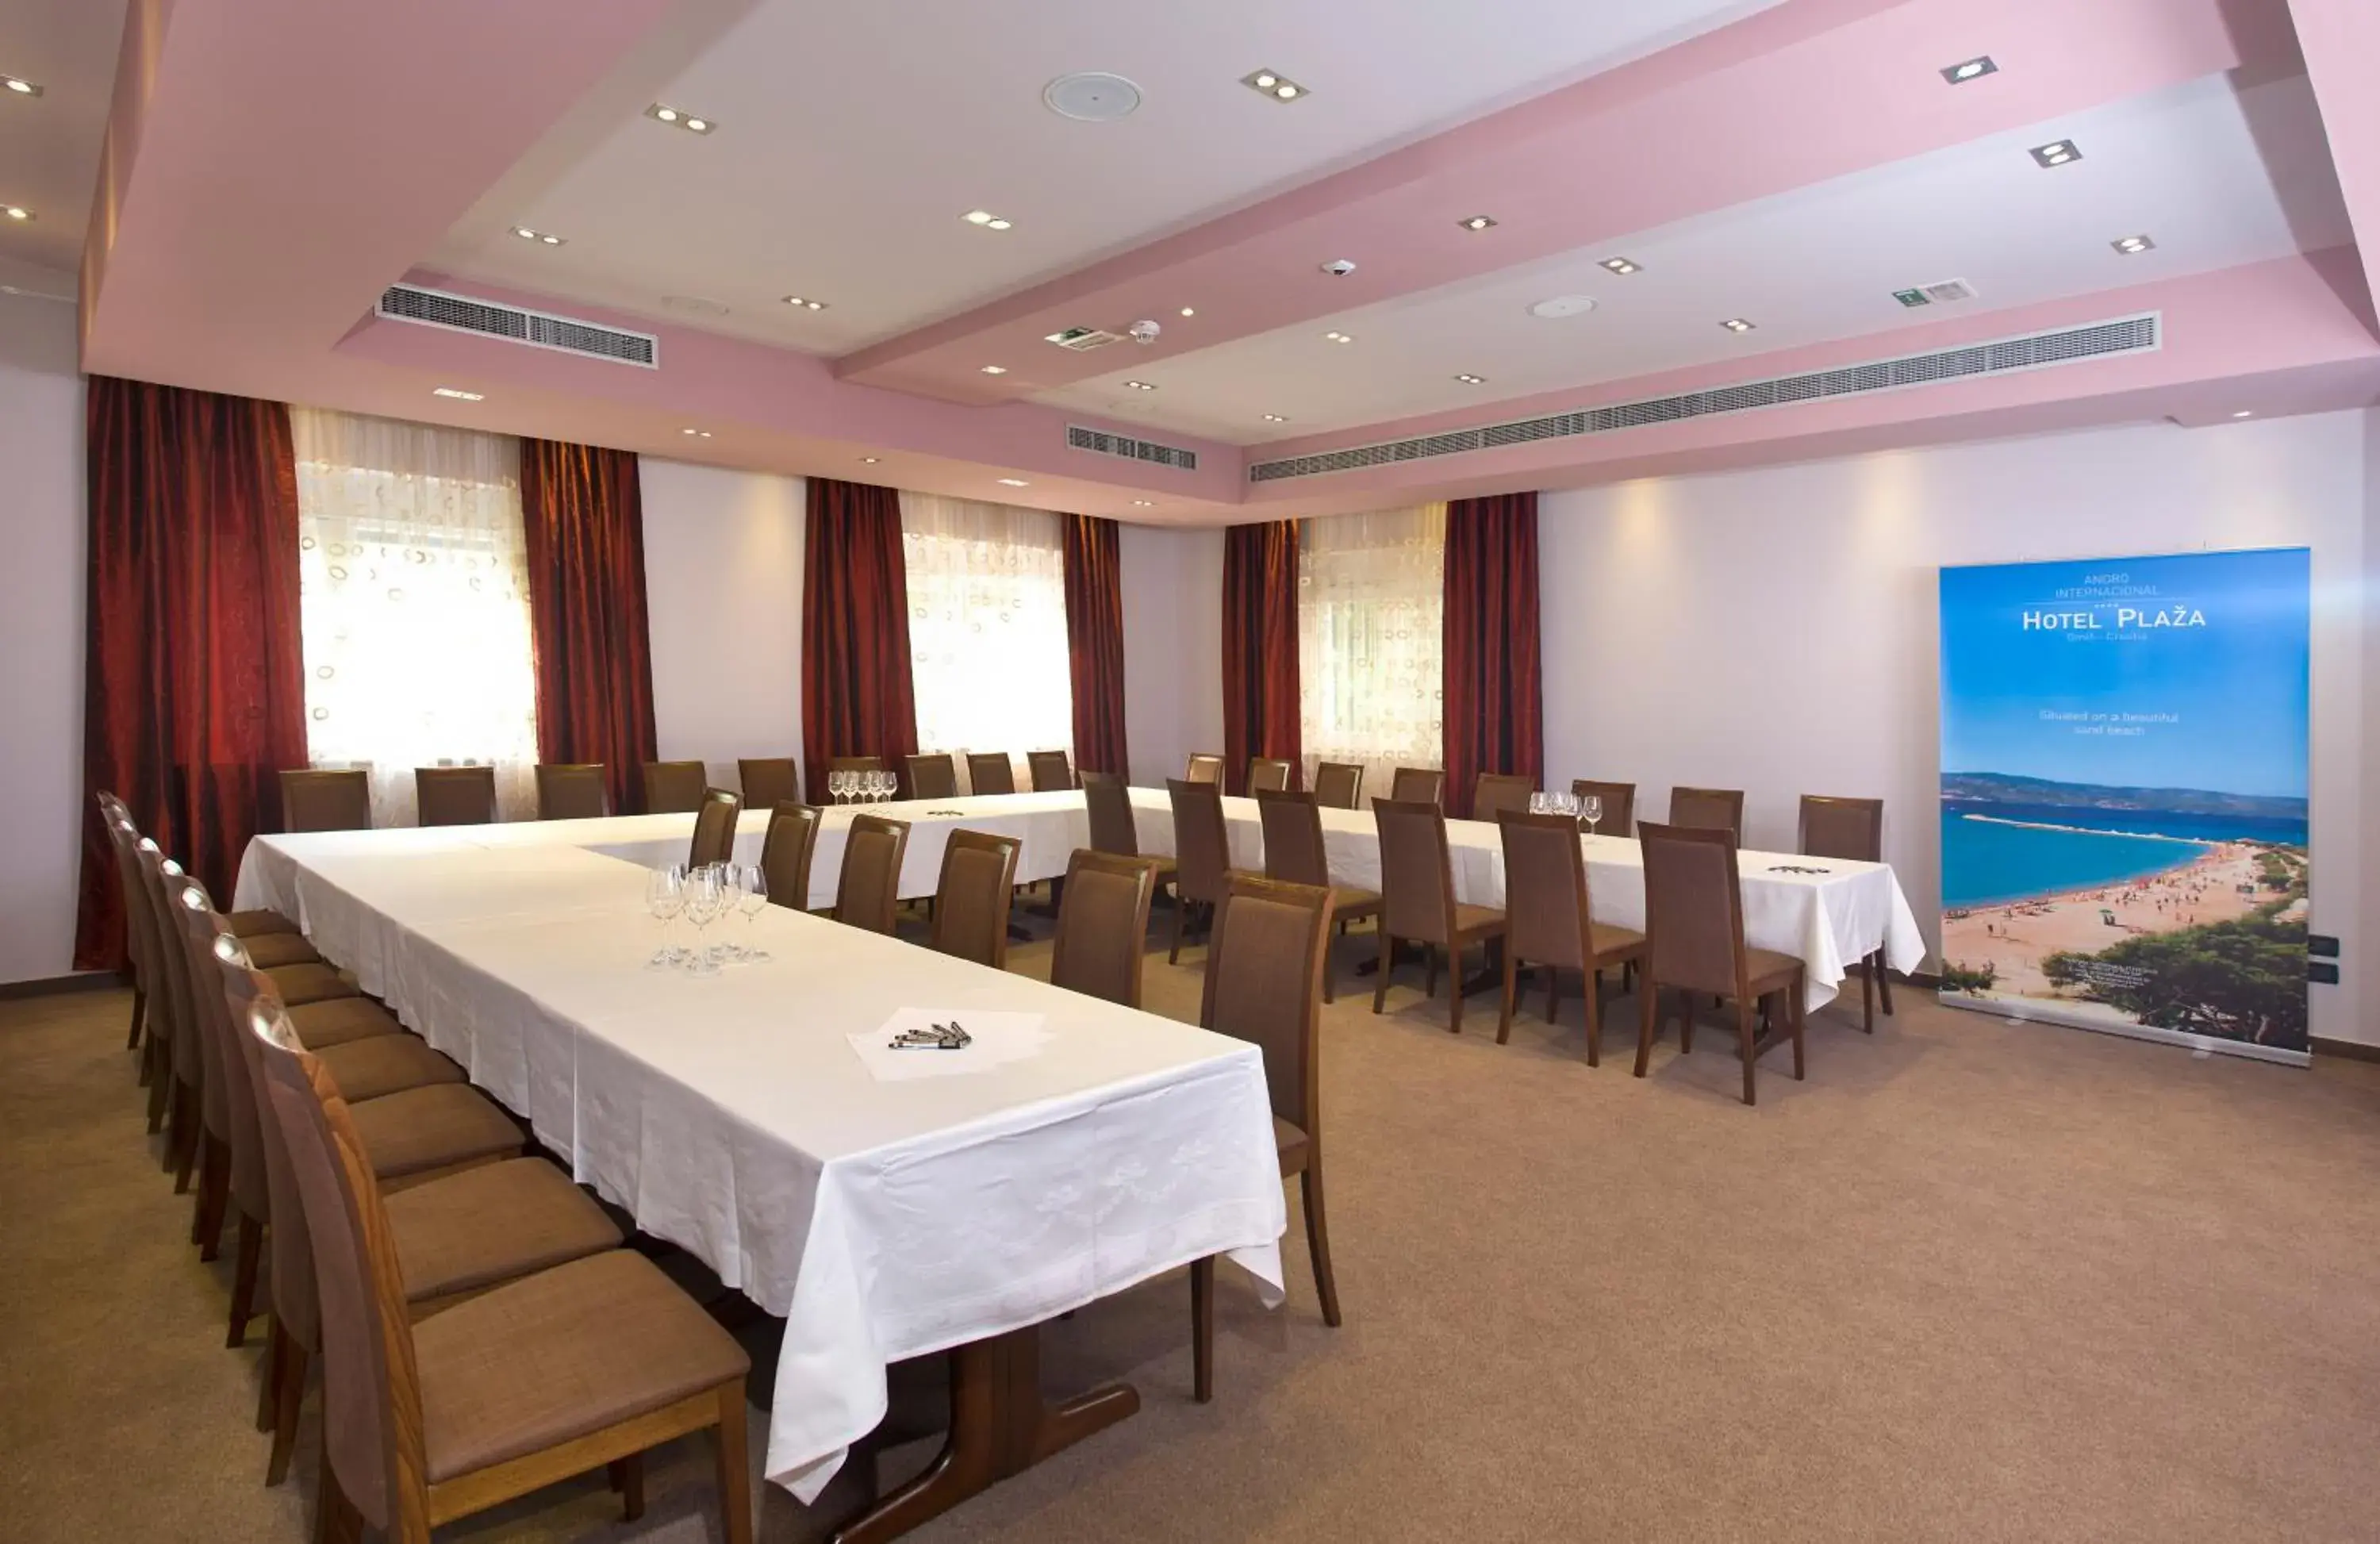 Meeting/conference room in Hotel Pla?a